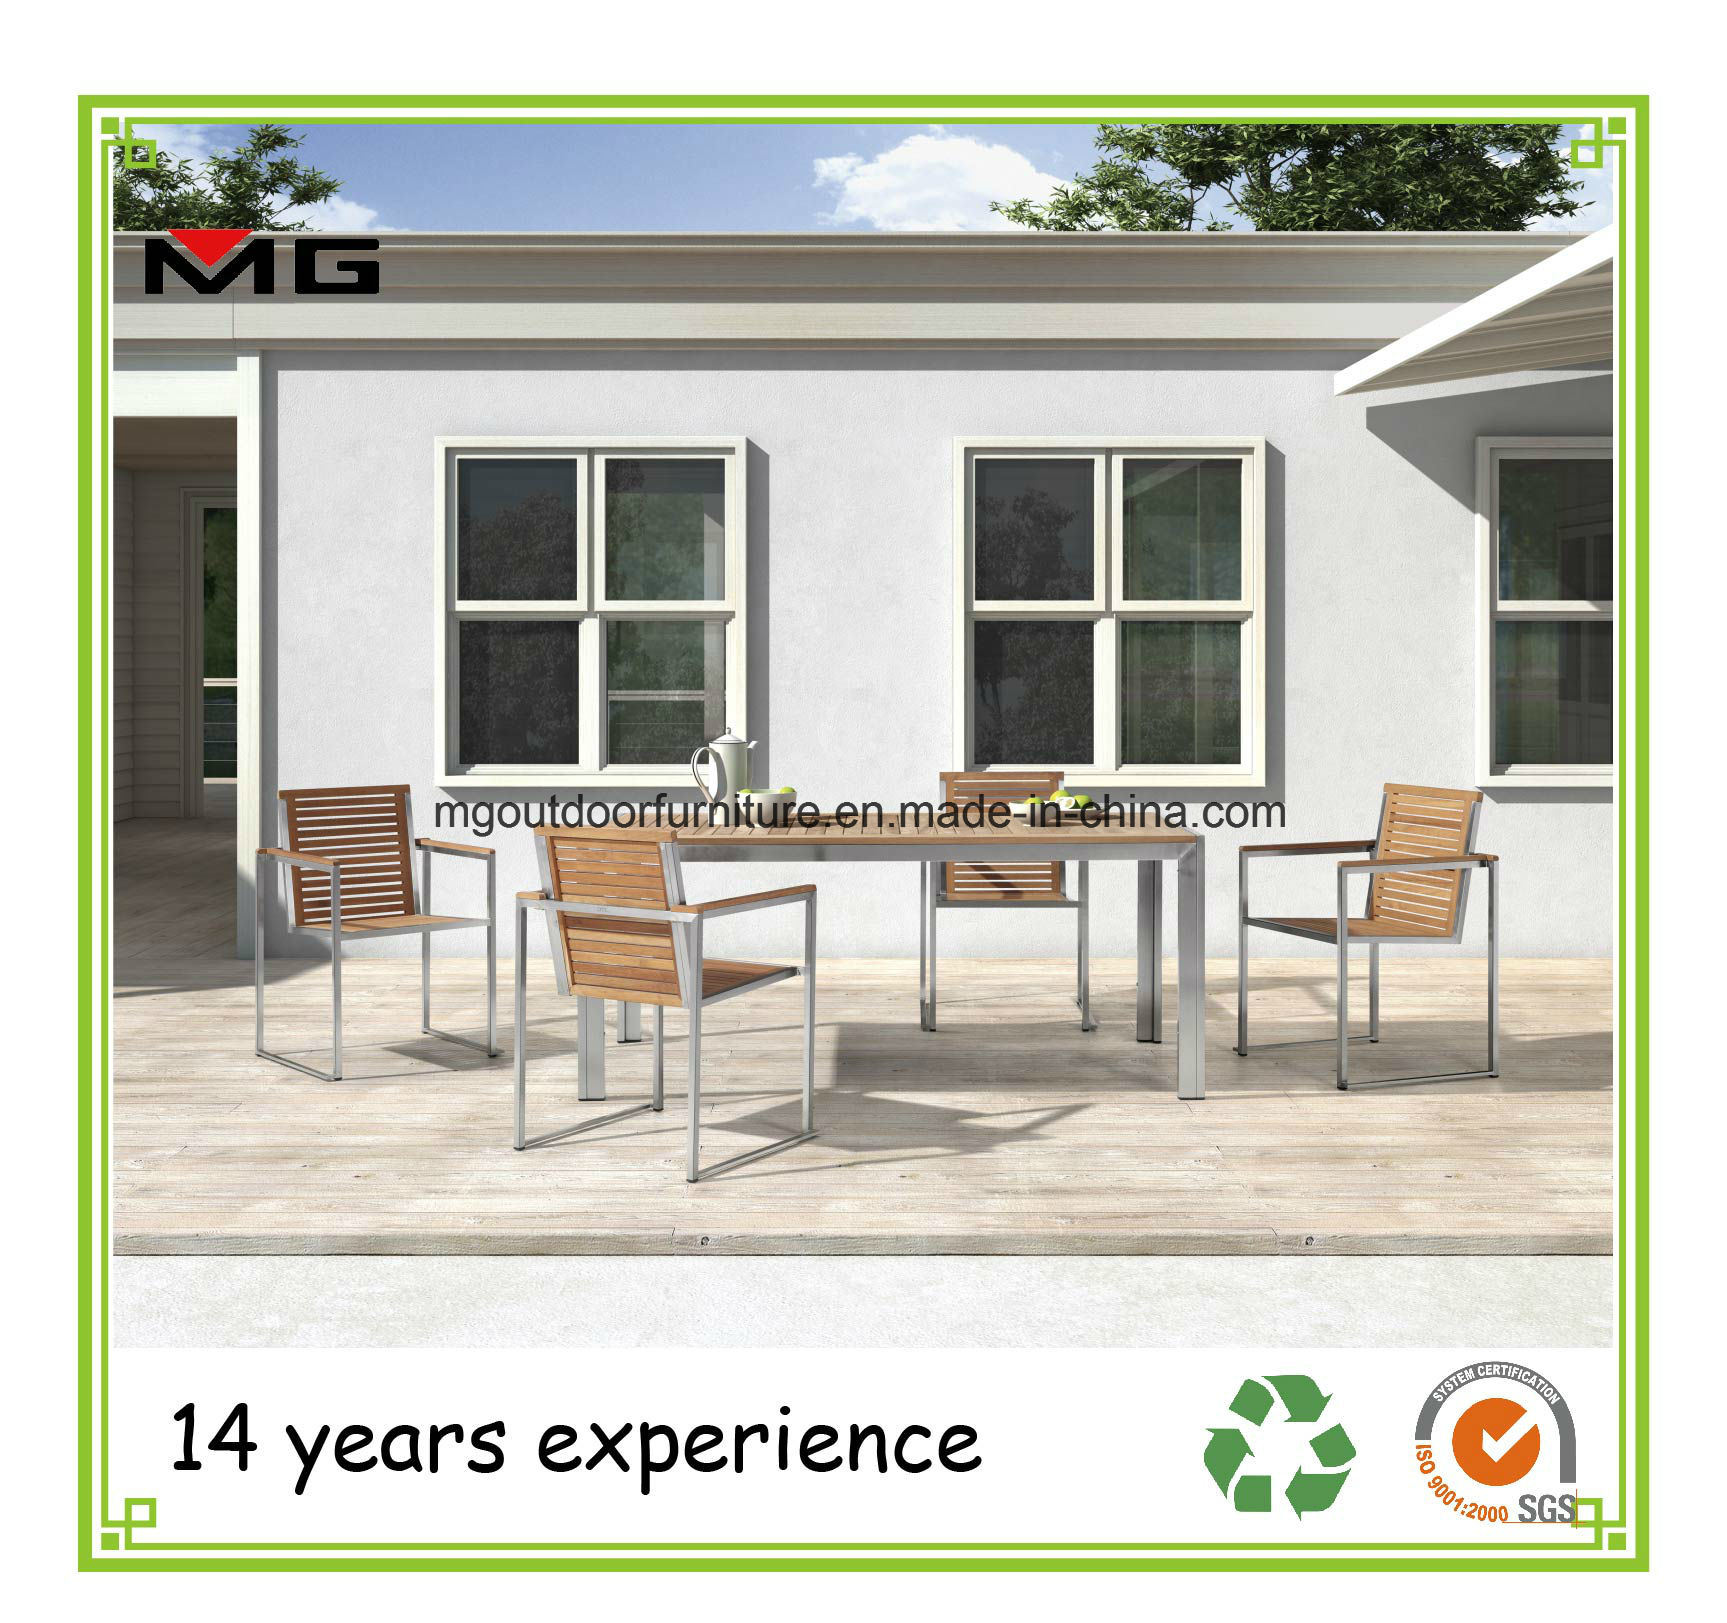 Teak Furniture Garden Chairs with Stainless Steel Frames